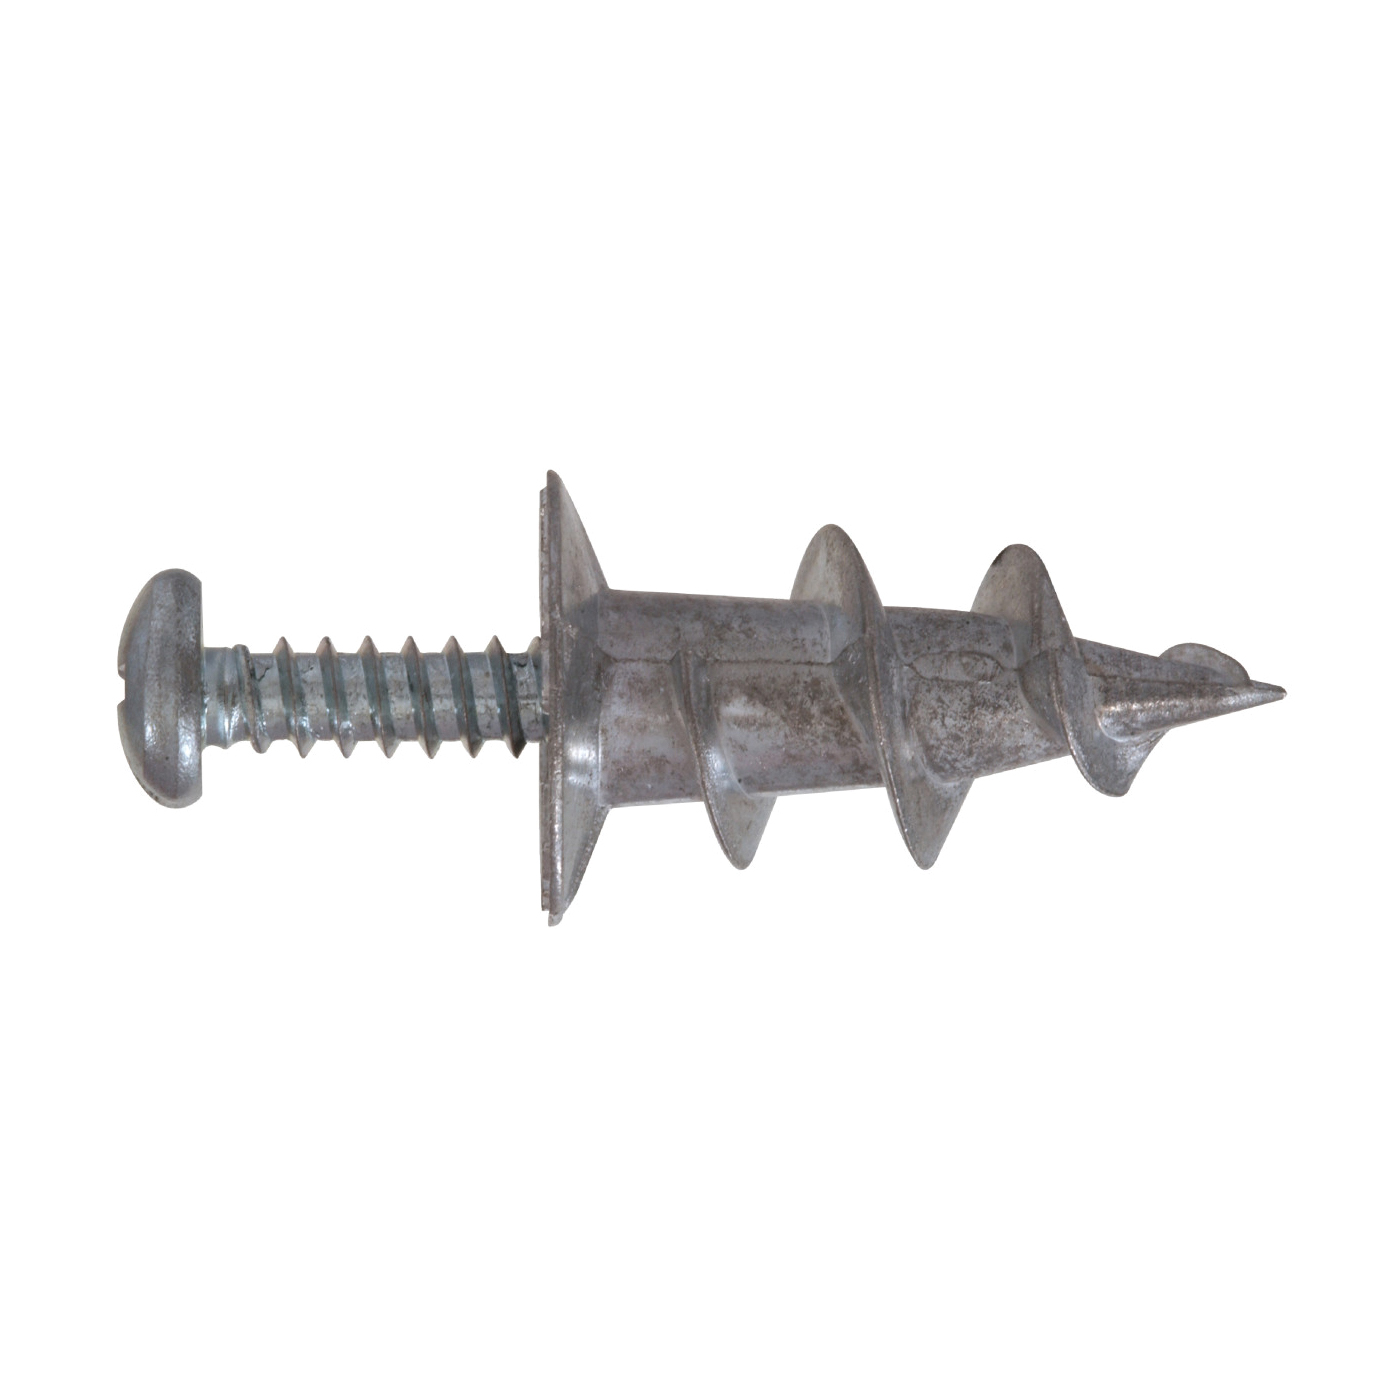 376231 Hollow Wall Anchor, 1-1/4 in L, Steel, 50 lb